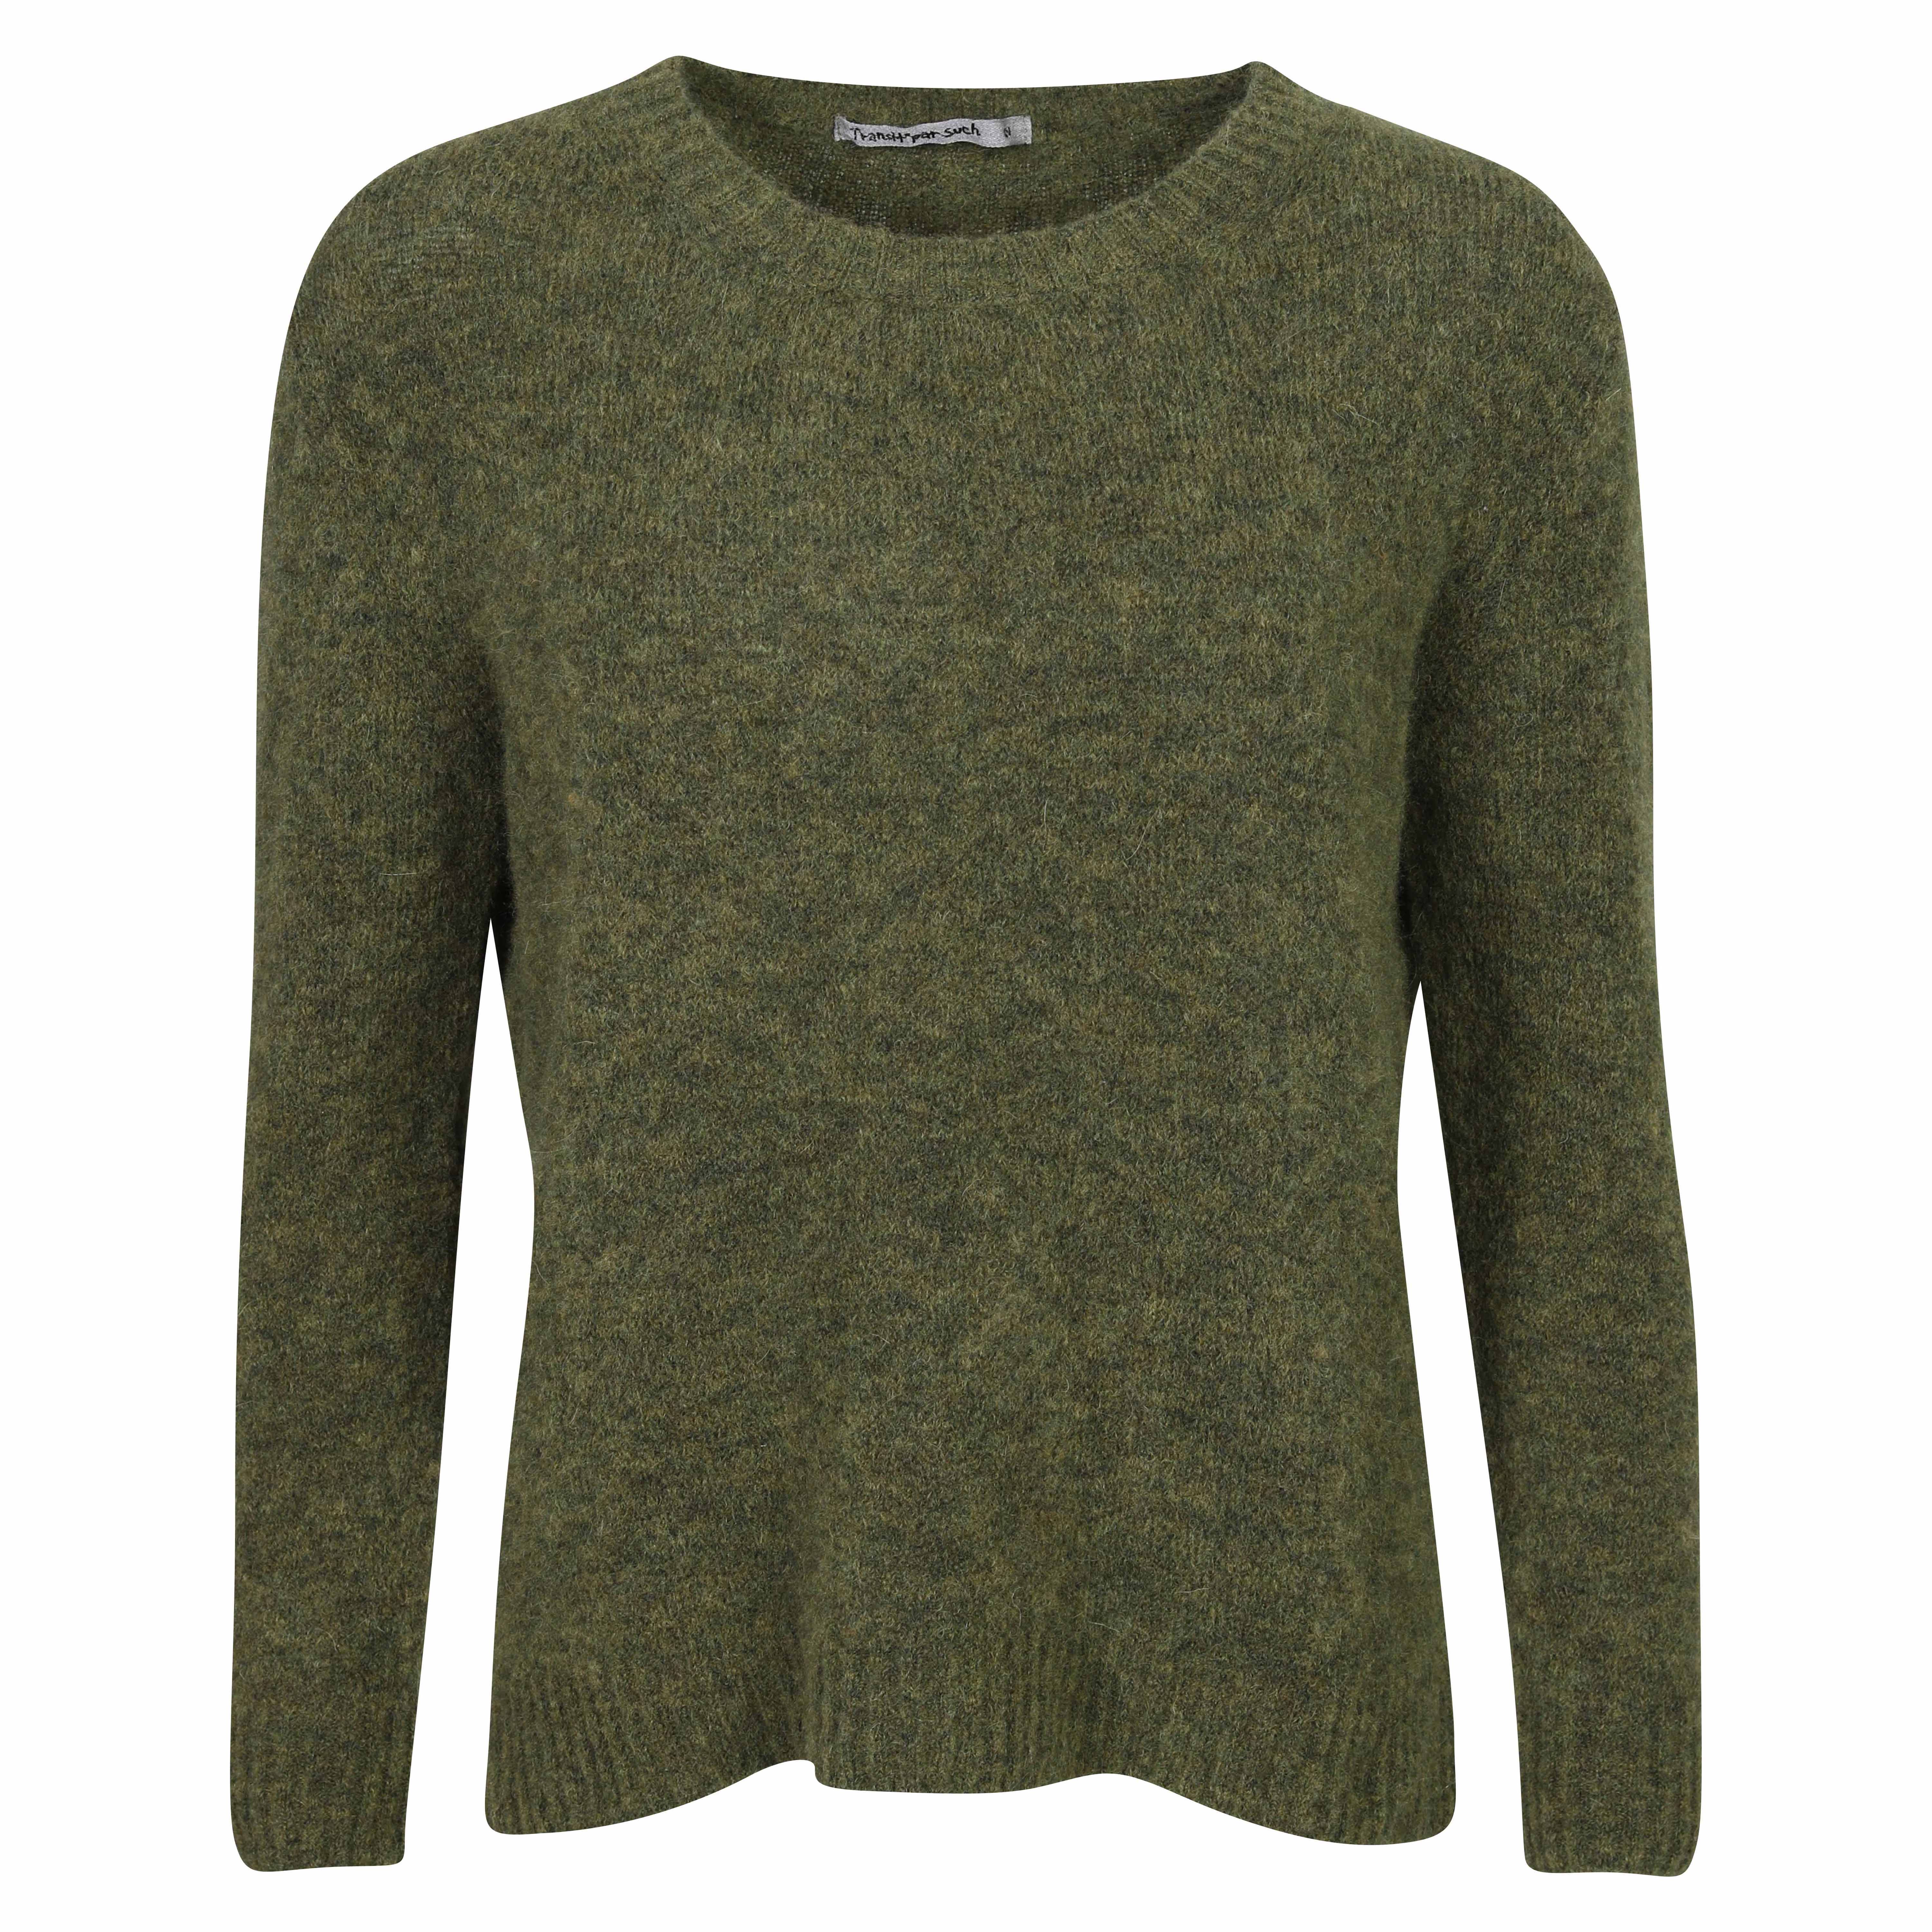 Transit Par Such Fluffy Knit Pullover in Olive S